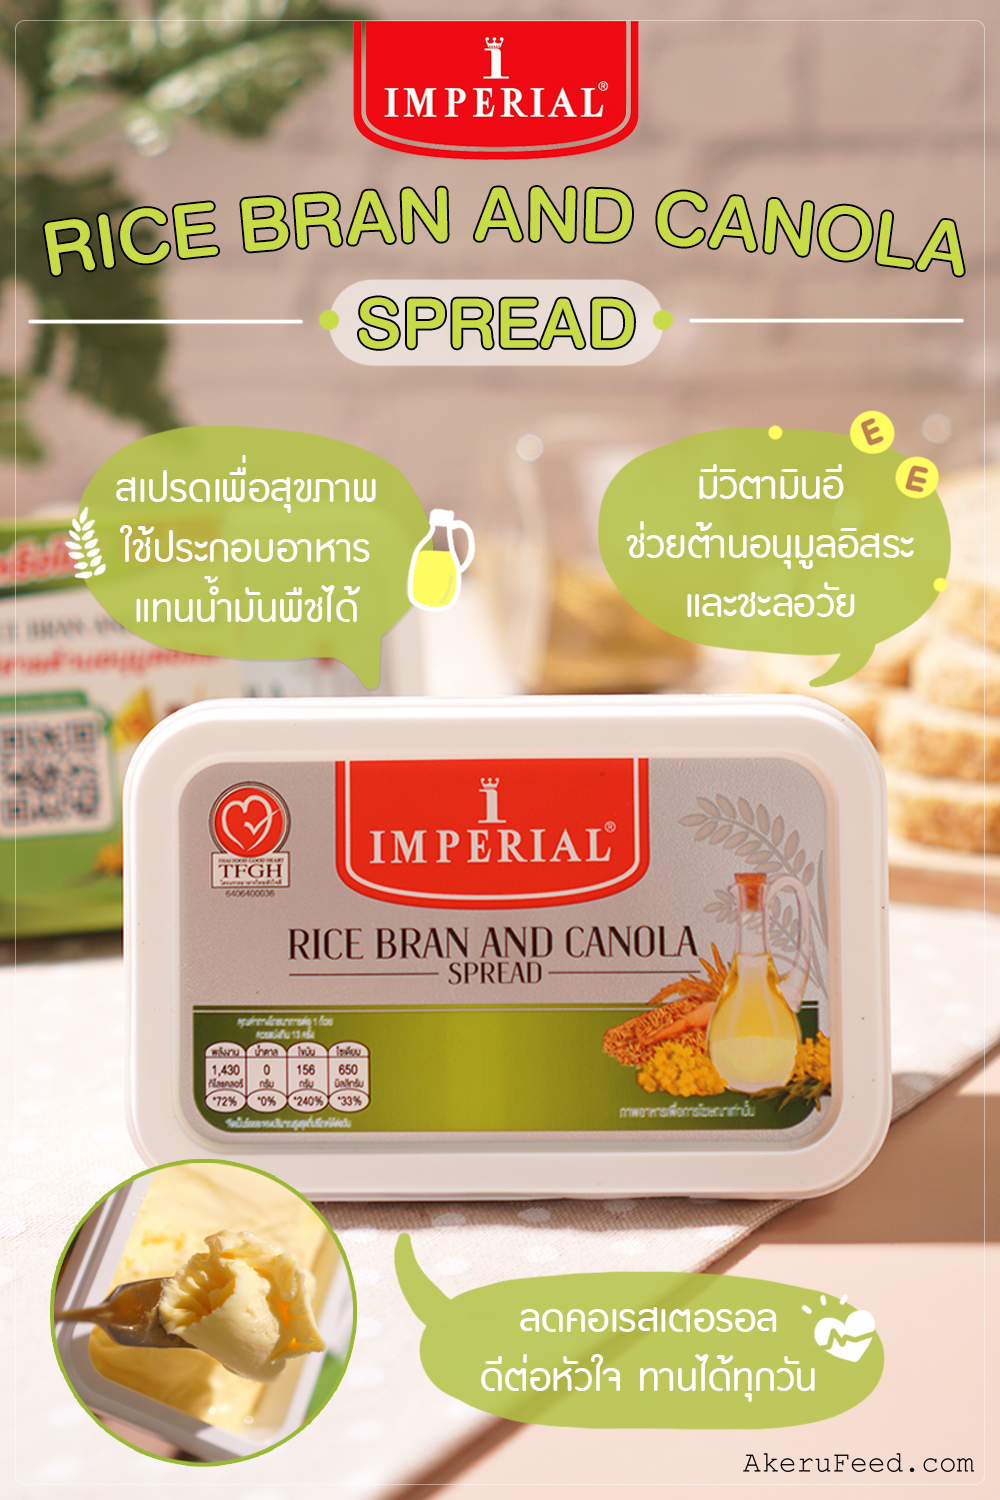 Imperial Rice Bran and Canola Spread